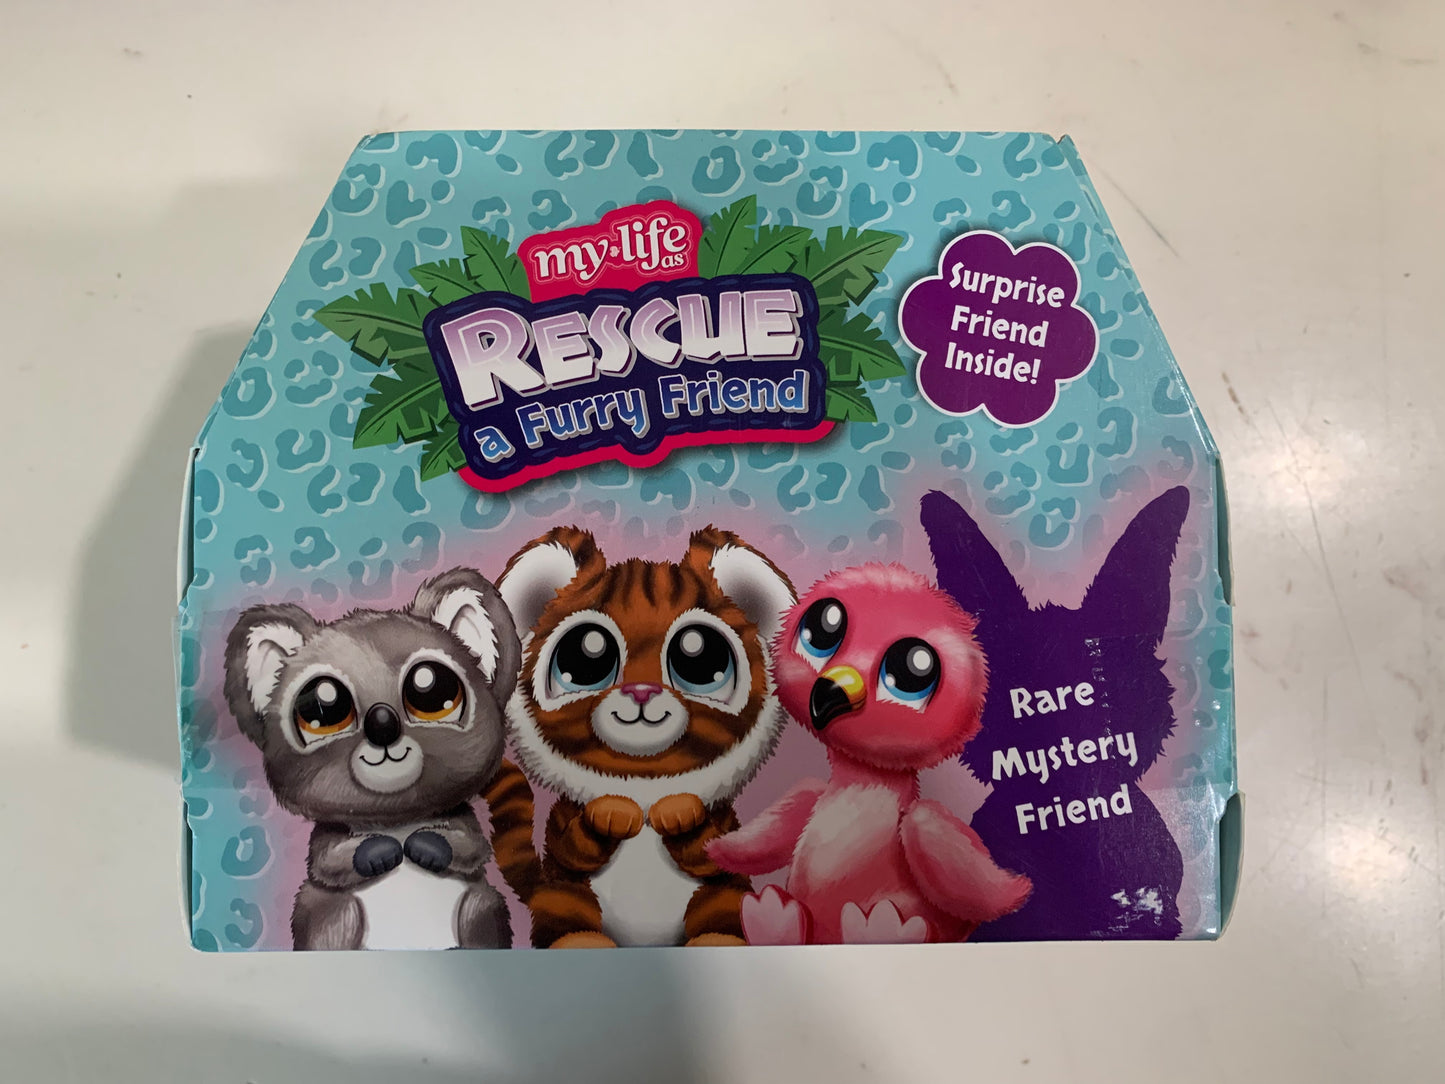 My Life As Rescue A Furry Friend Animal Surprise Box 24338